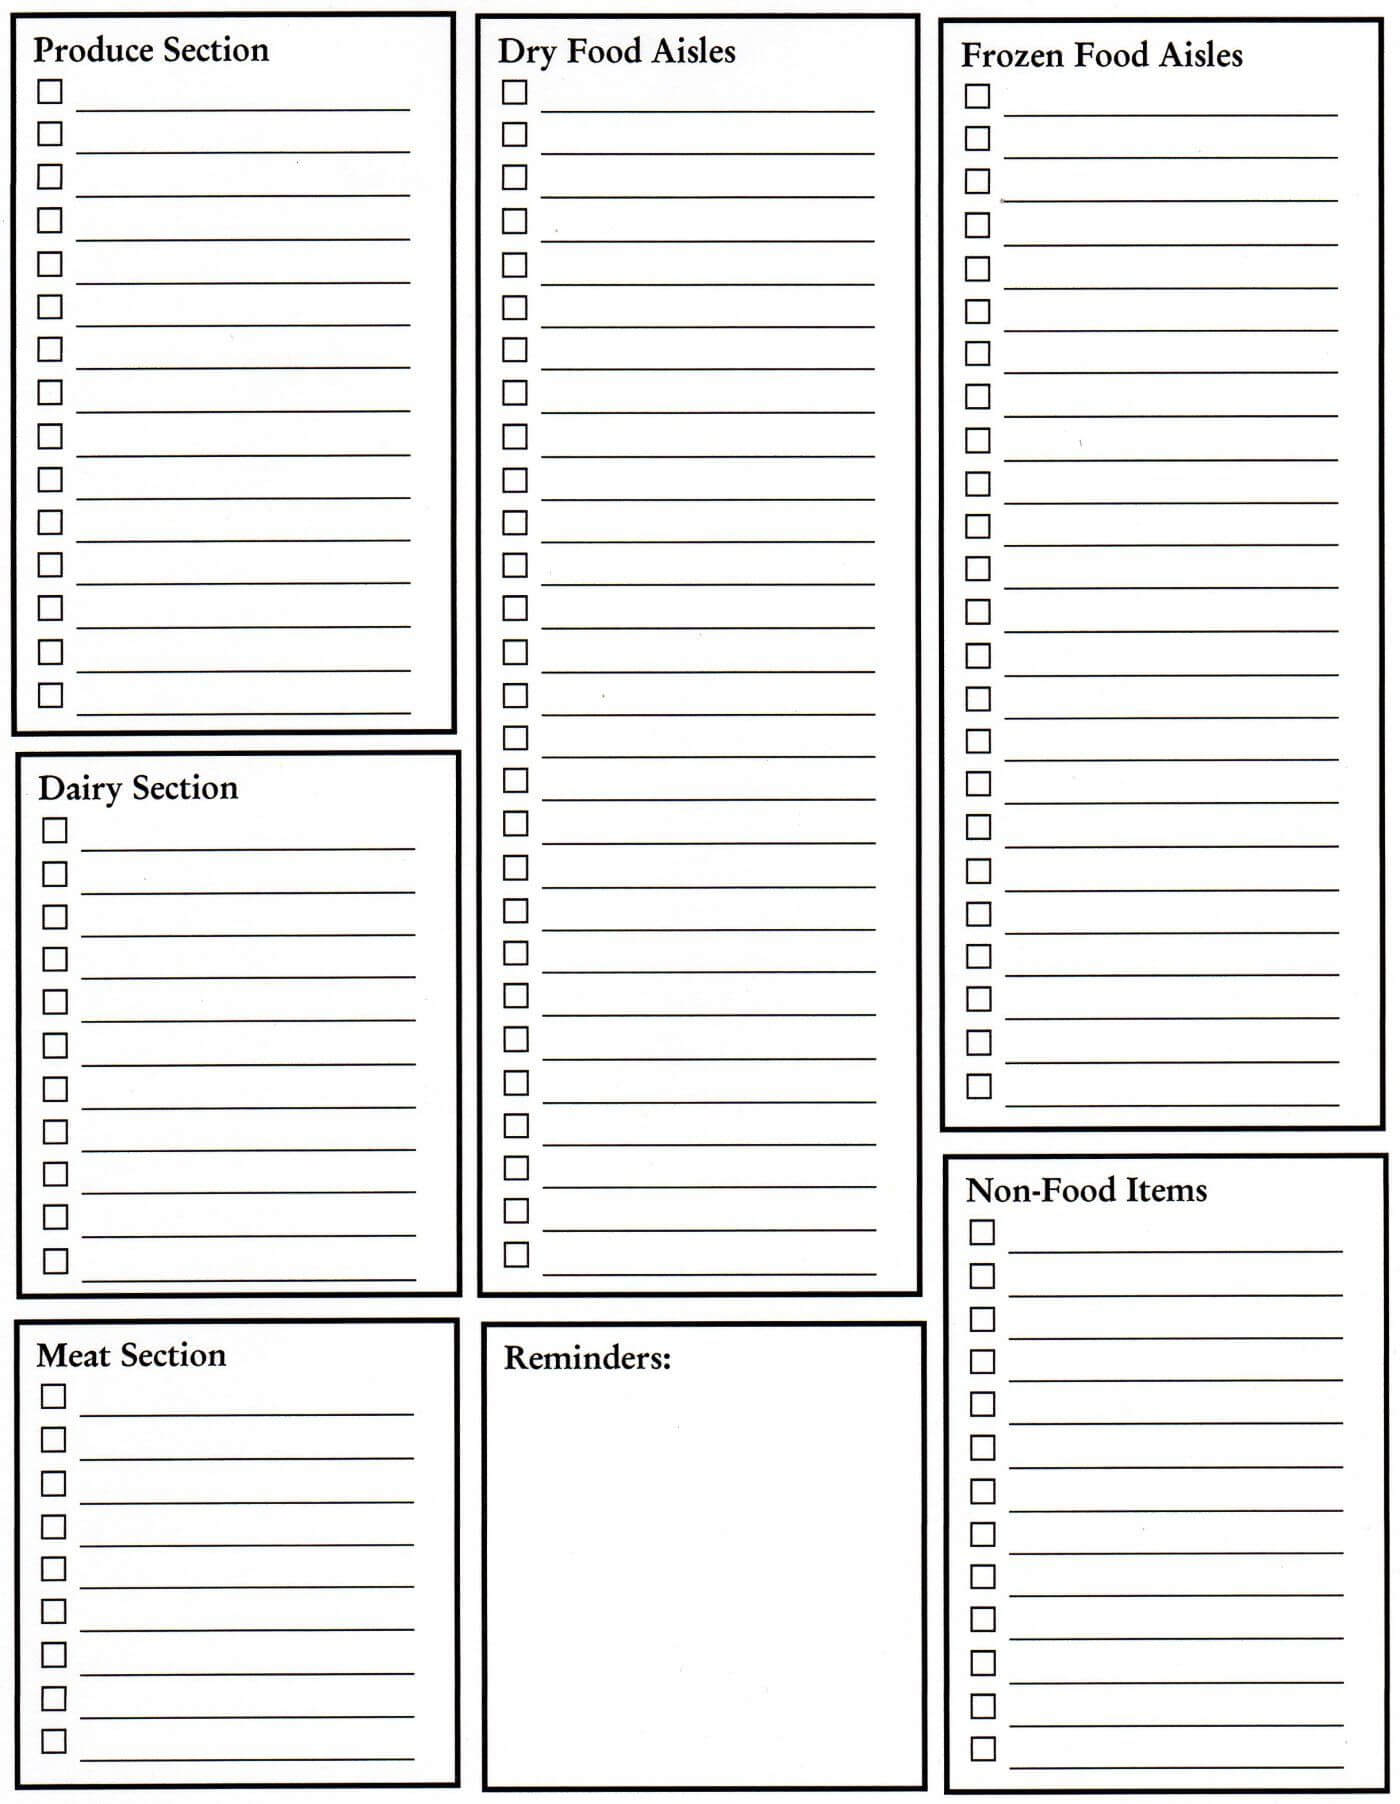 Grocery List Blank Template Great Idea, Need To Keep On Regarding Blank Grocery Shopping List Template